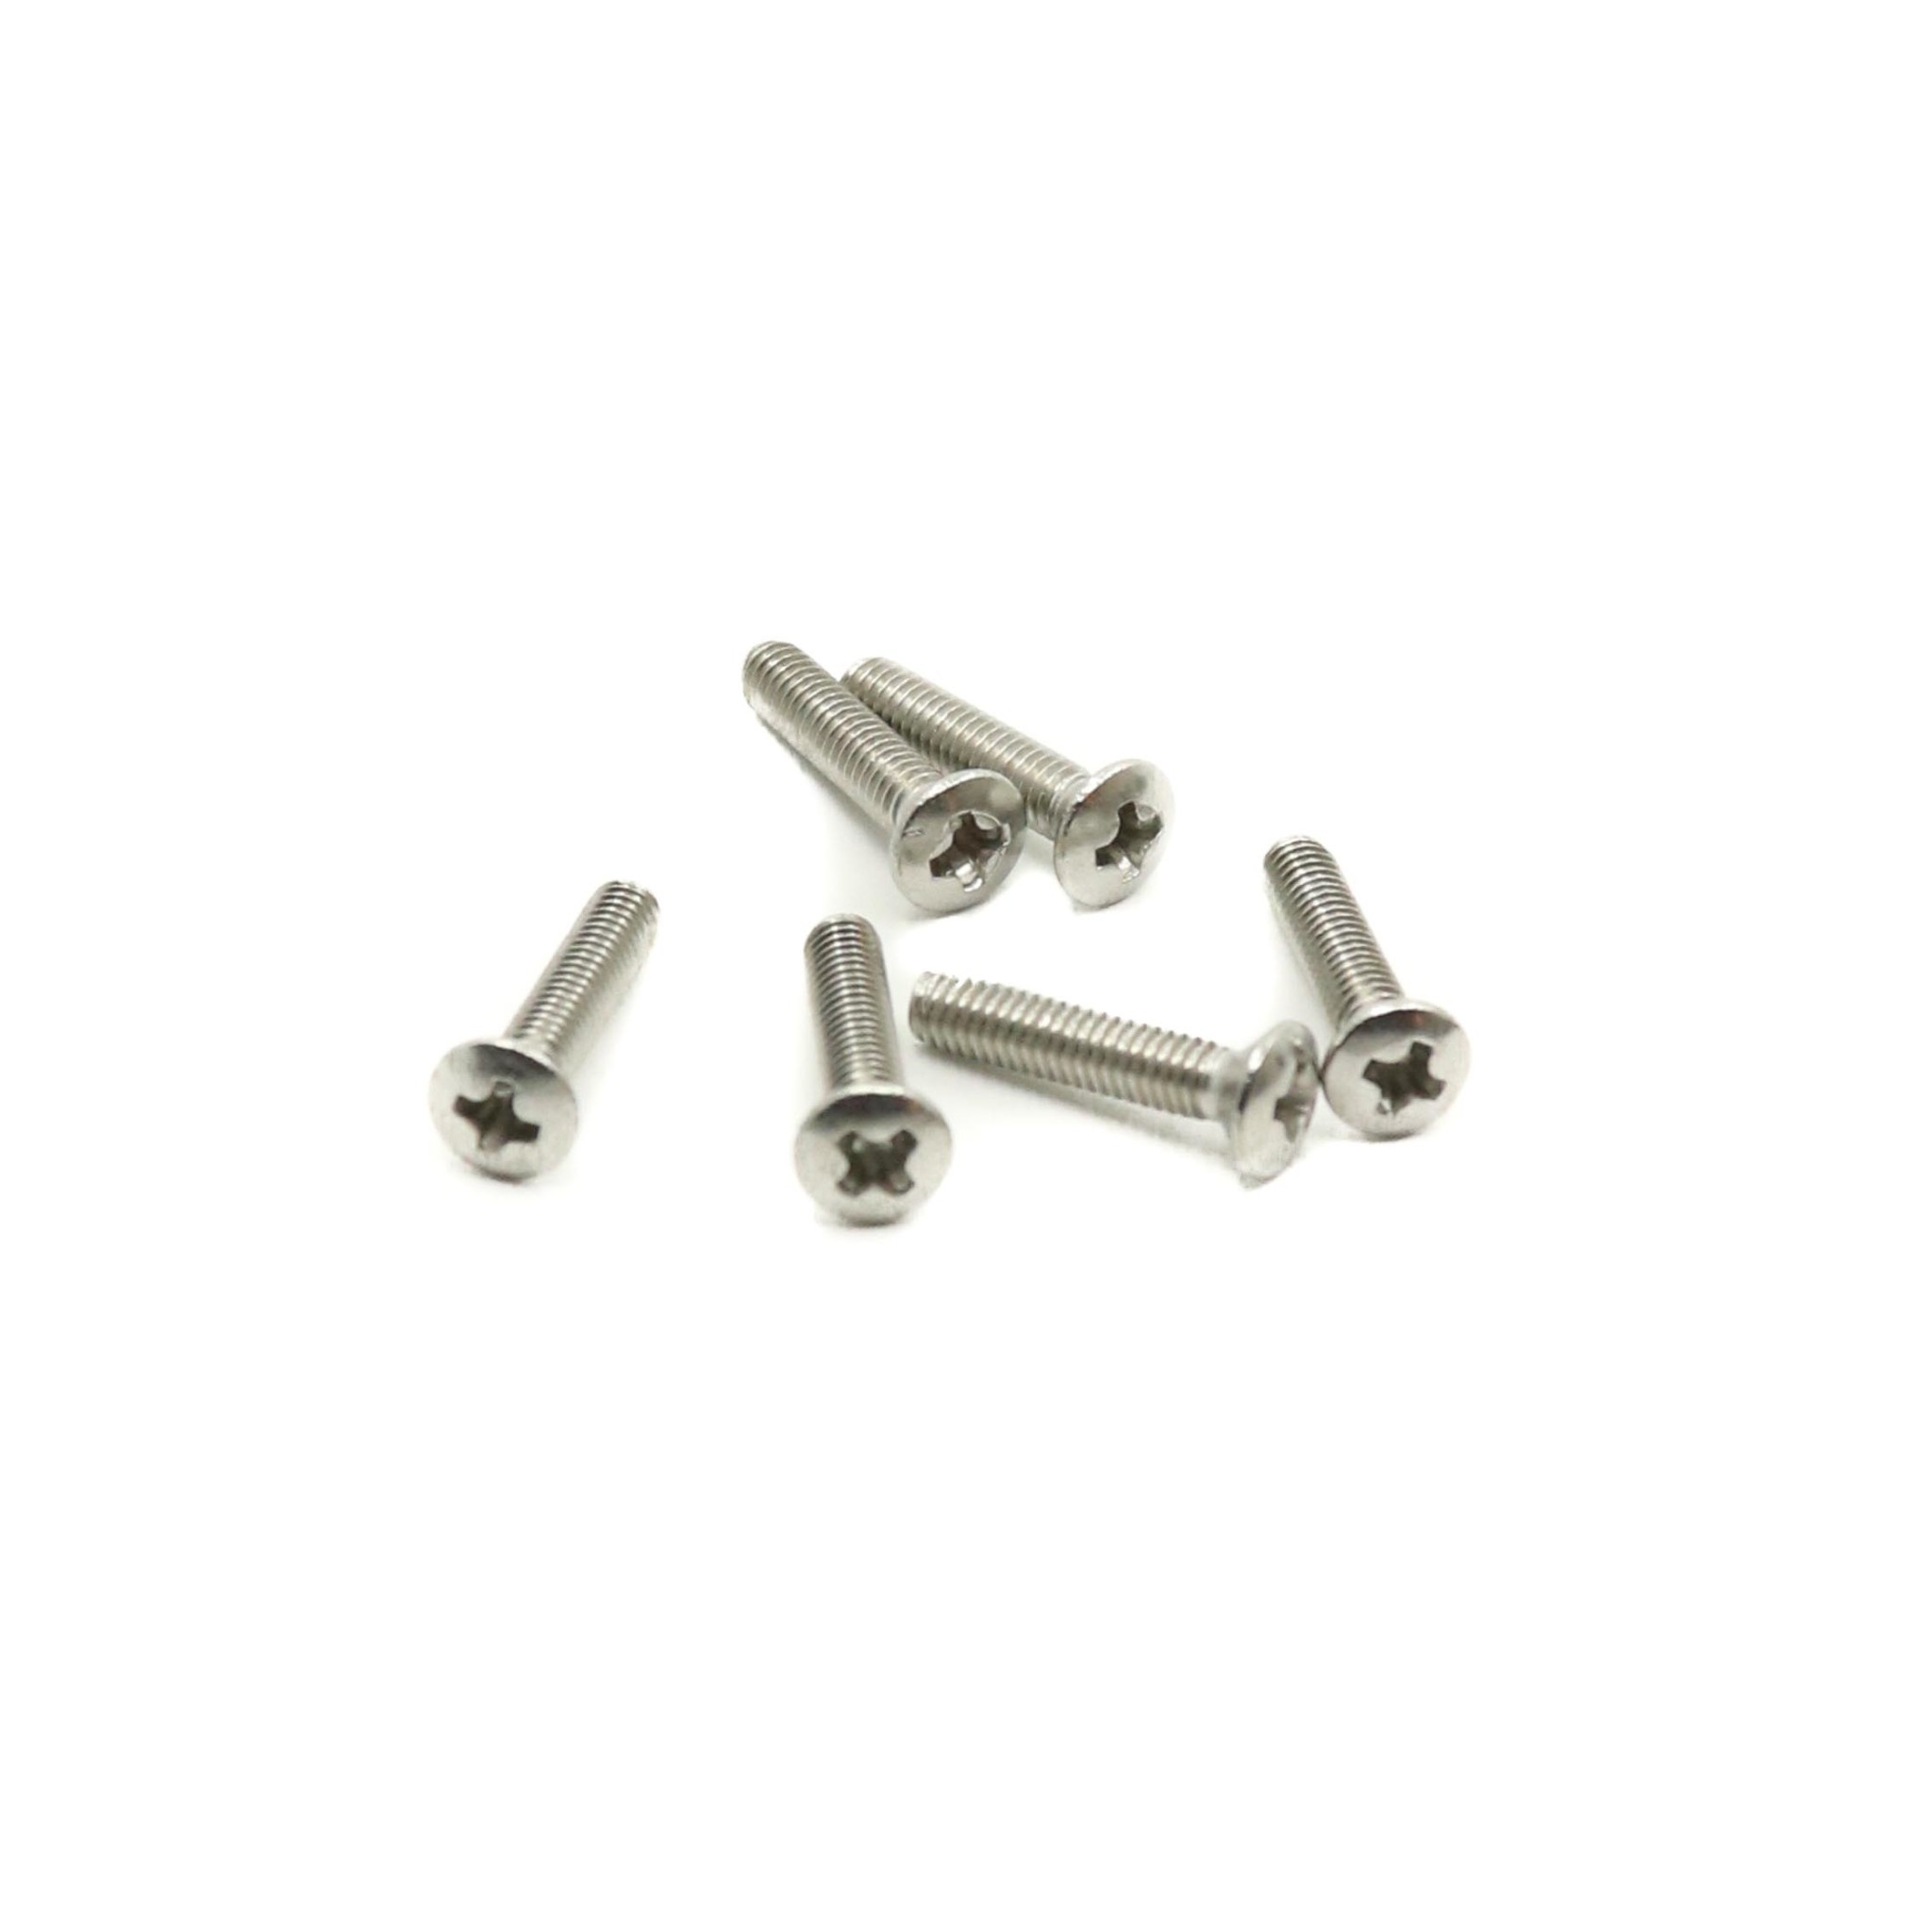 MannMade USA MannMade USA Tuner Button Screw, Short - Stainless Steel